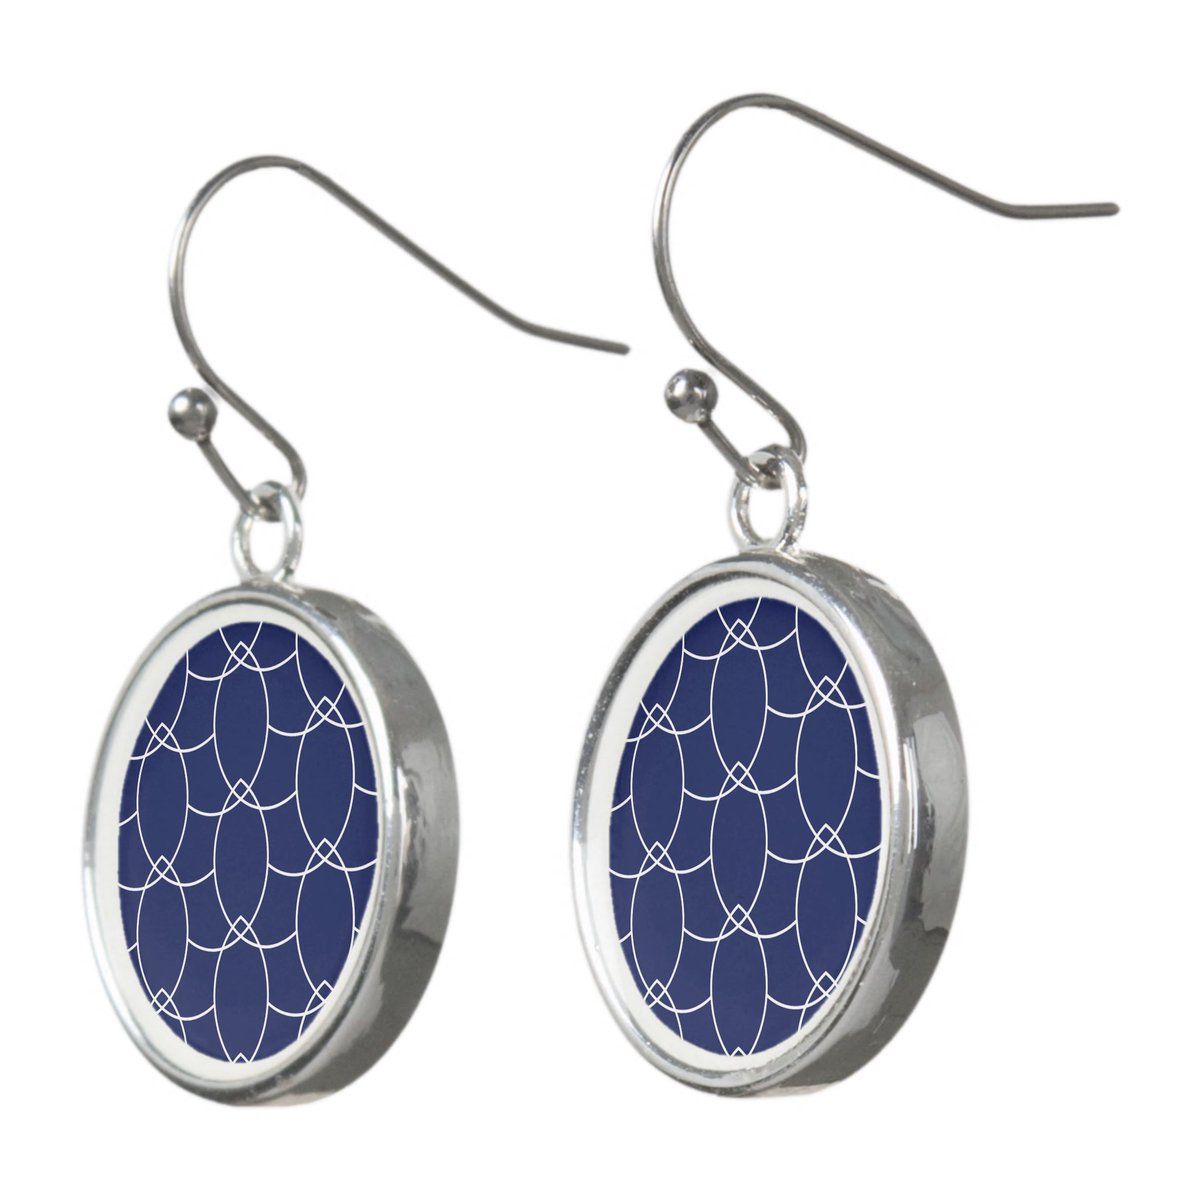 Modern Navy Blue and White Abstract  Earrings zazzle.co.uk/modern_navy_bl… via @zazzle #dropearringsforwomen #women #fashion #FASHION #earrings #dropearrings #fashionearringsforwomen #fashionearrings #earringsforsale #navyblueandwhite #whiteandnavyblue #Stylish #elegant #chic #Trendy